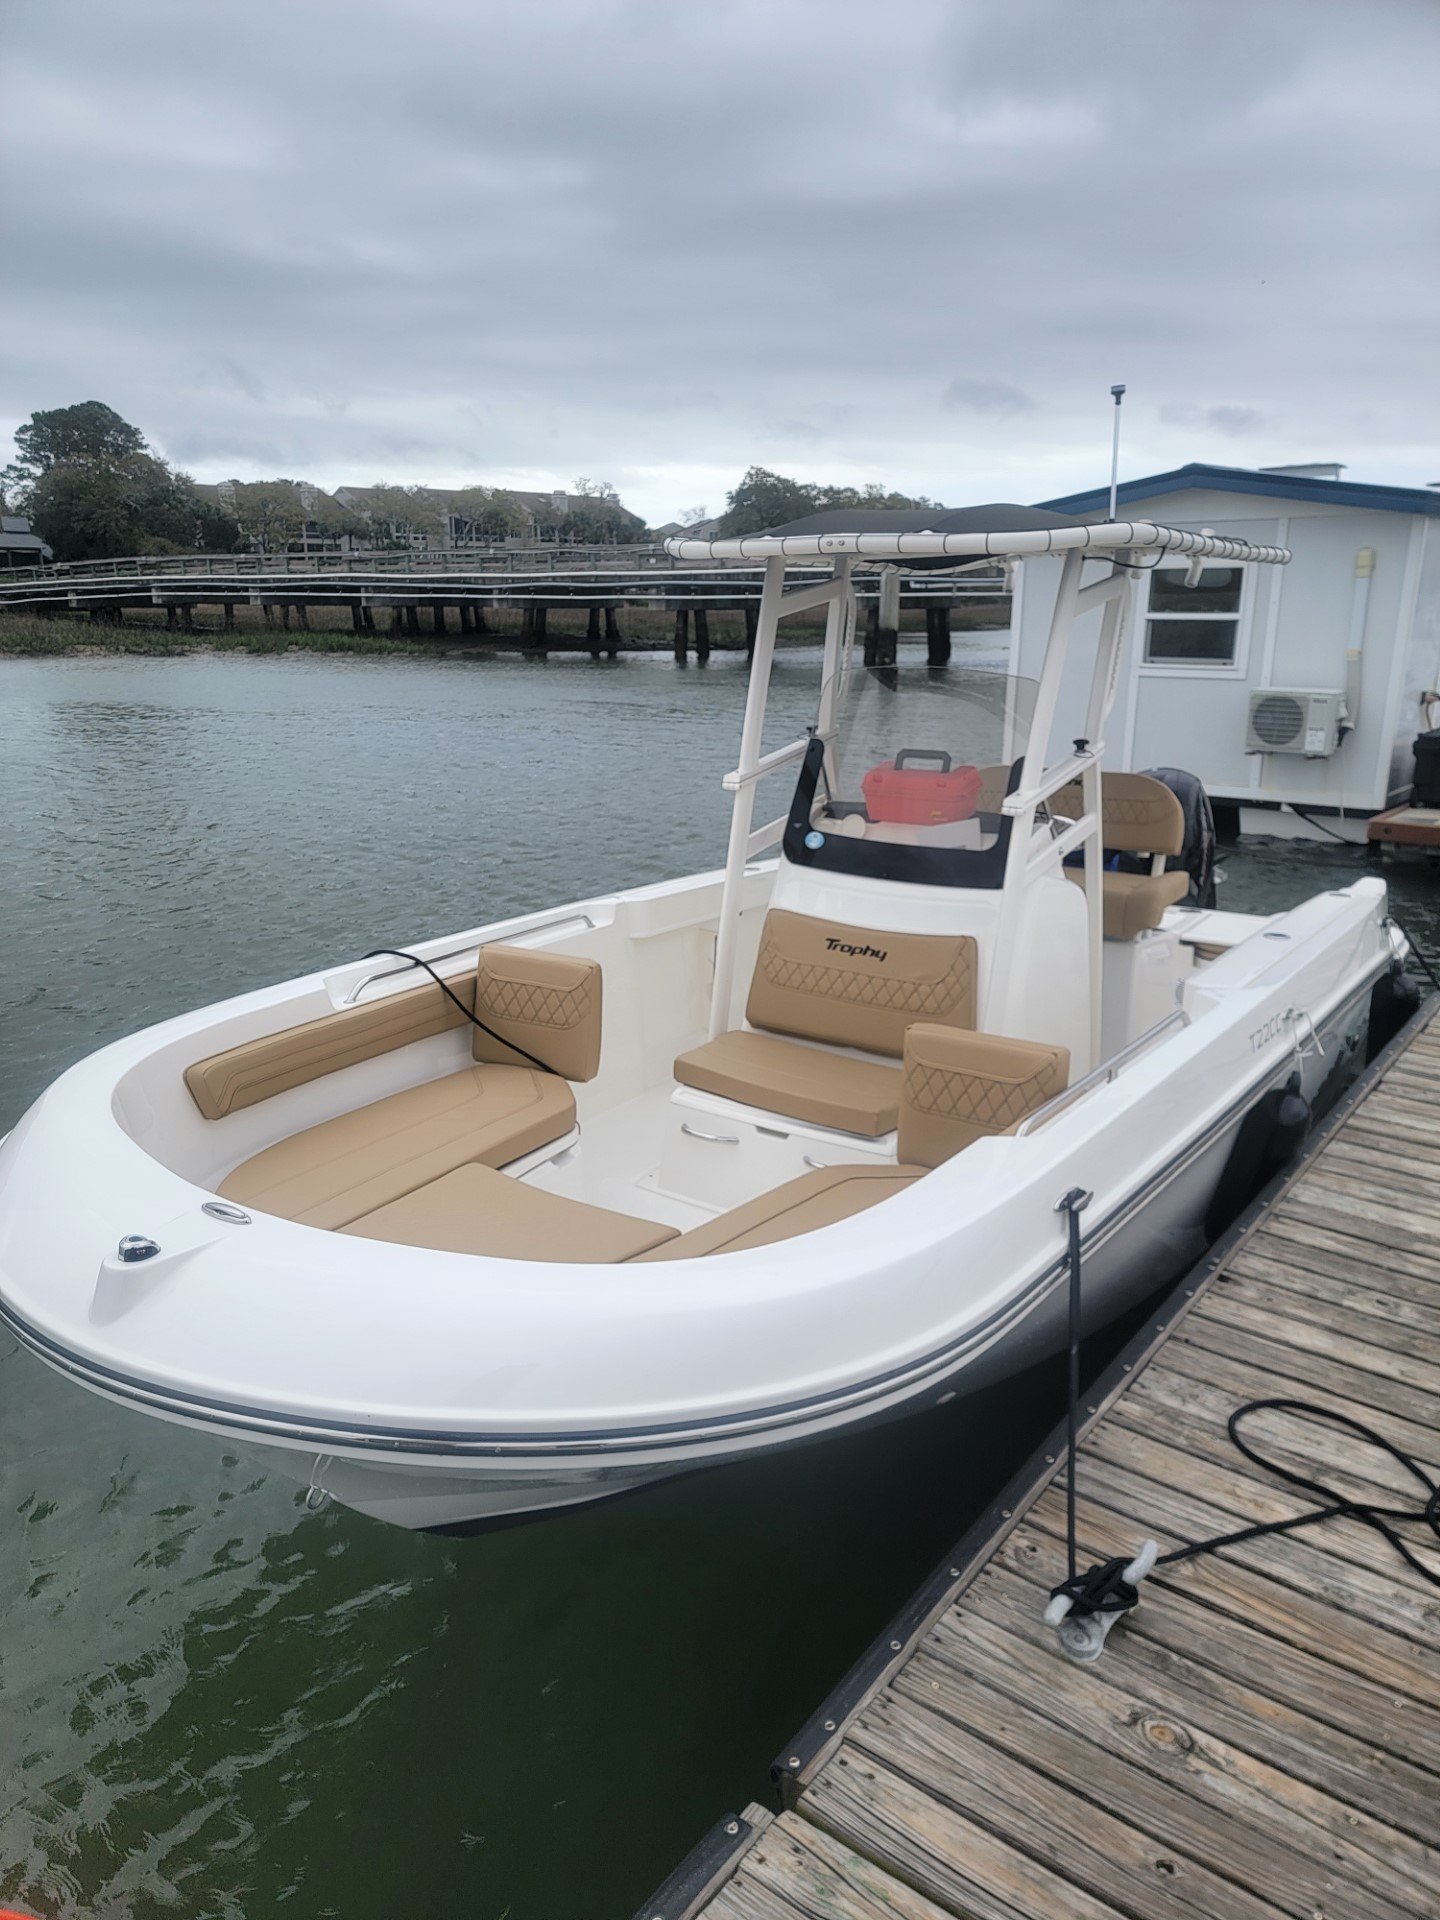 Island Freedom 3 (22FT Bayliner Trophy 22 Center Console - 150 HP~Fishing)